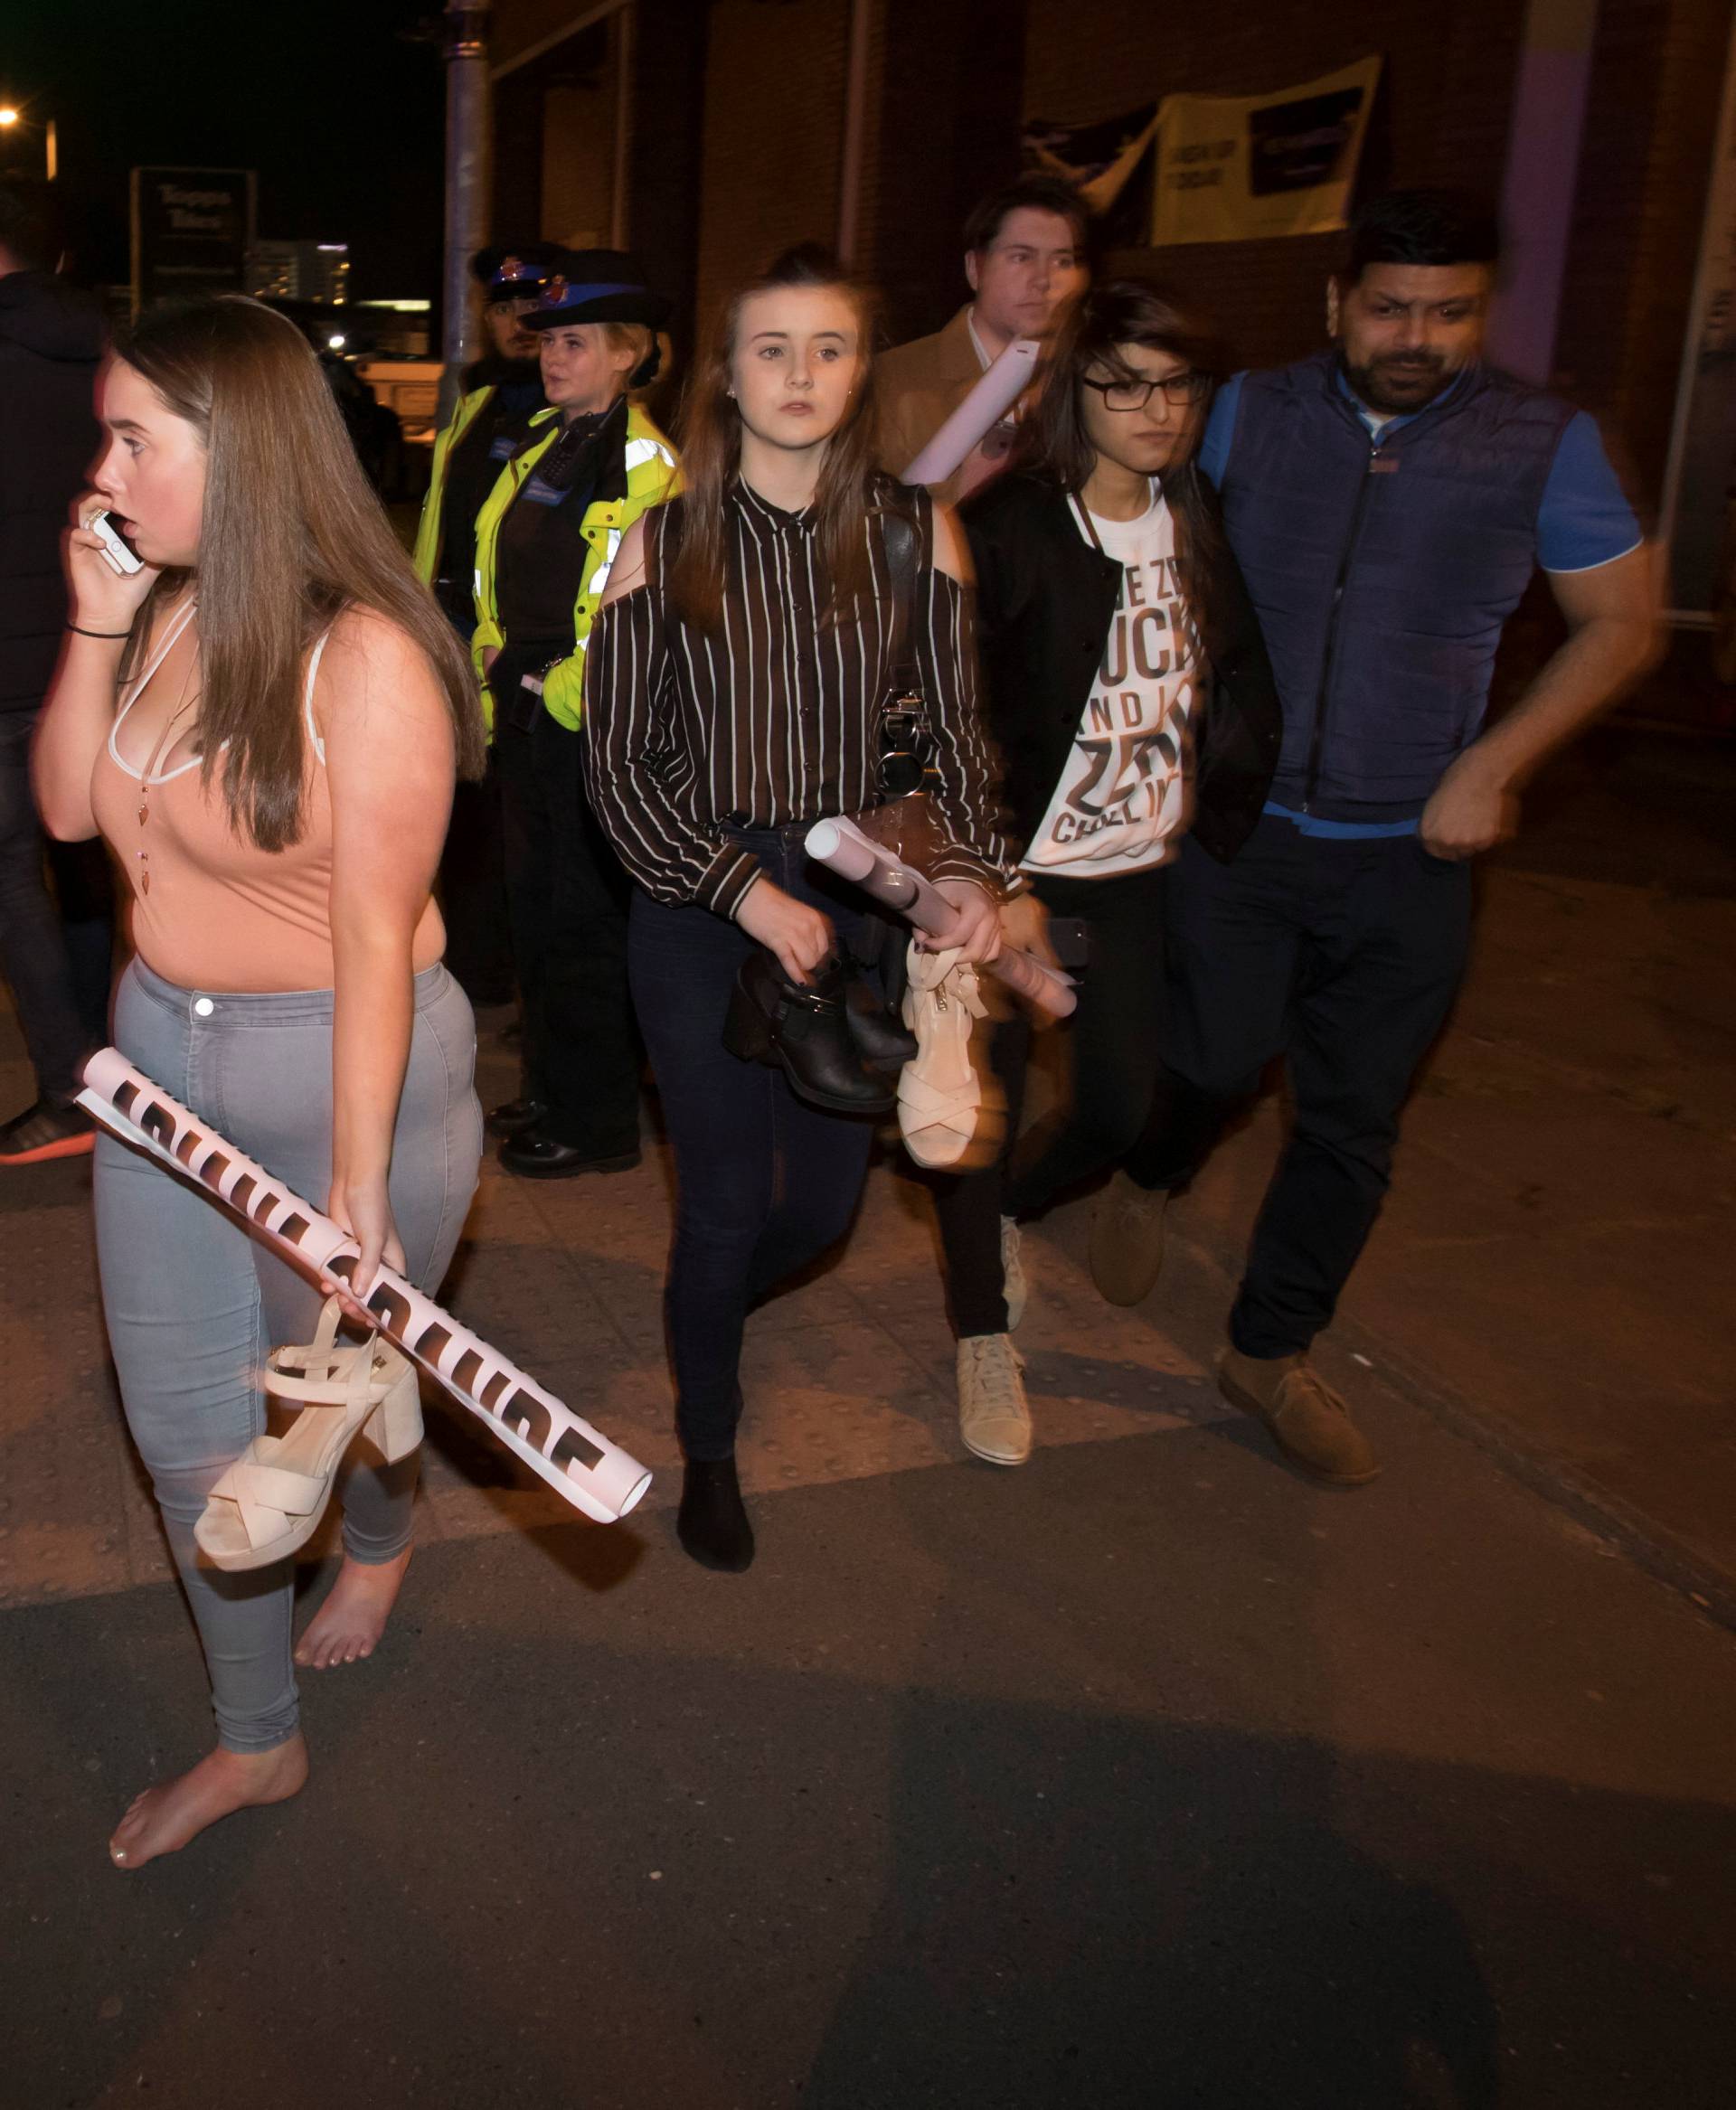 Concert goers react after fleeing the Manchester Arena in northern England where U.S. singer Ariana Grande had been performing in Manchester